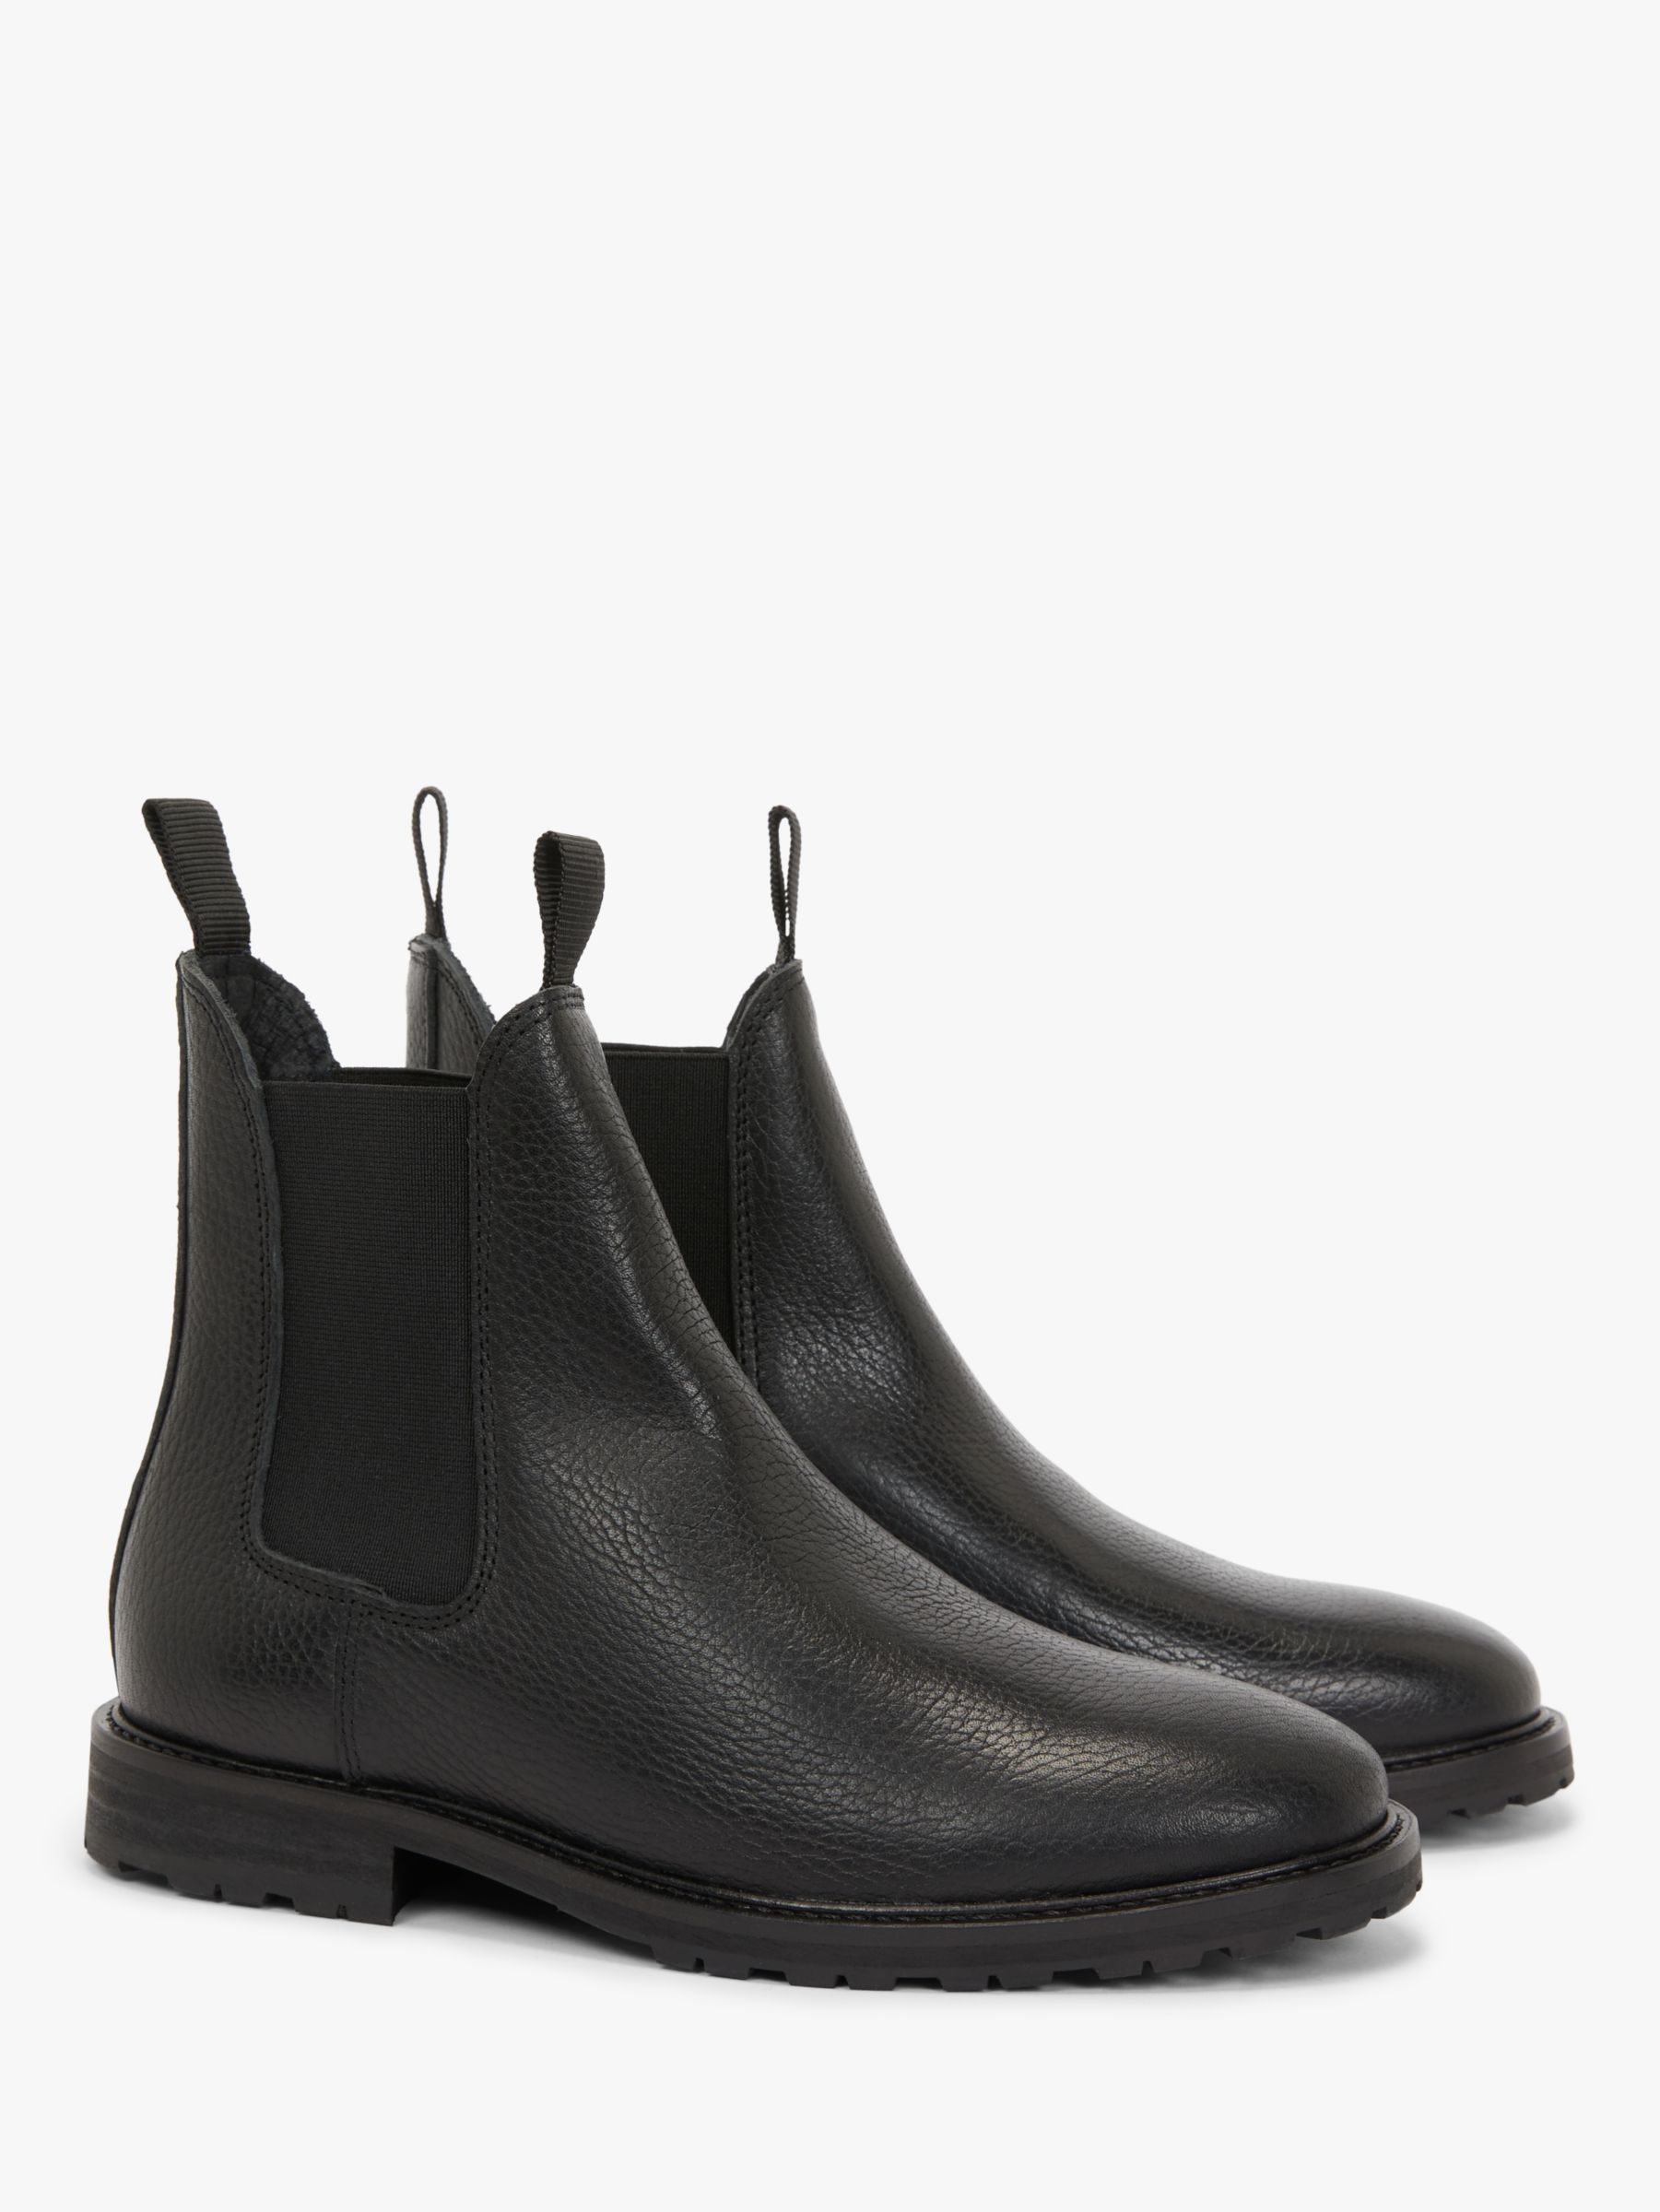 SHOE THE BEAR Avery Leather Chelsea Boots, Black